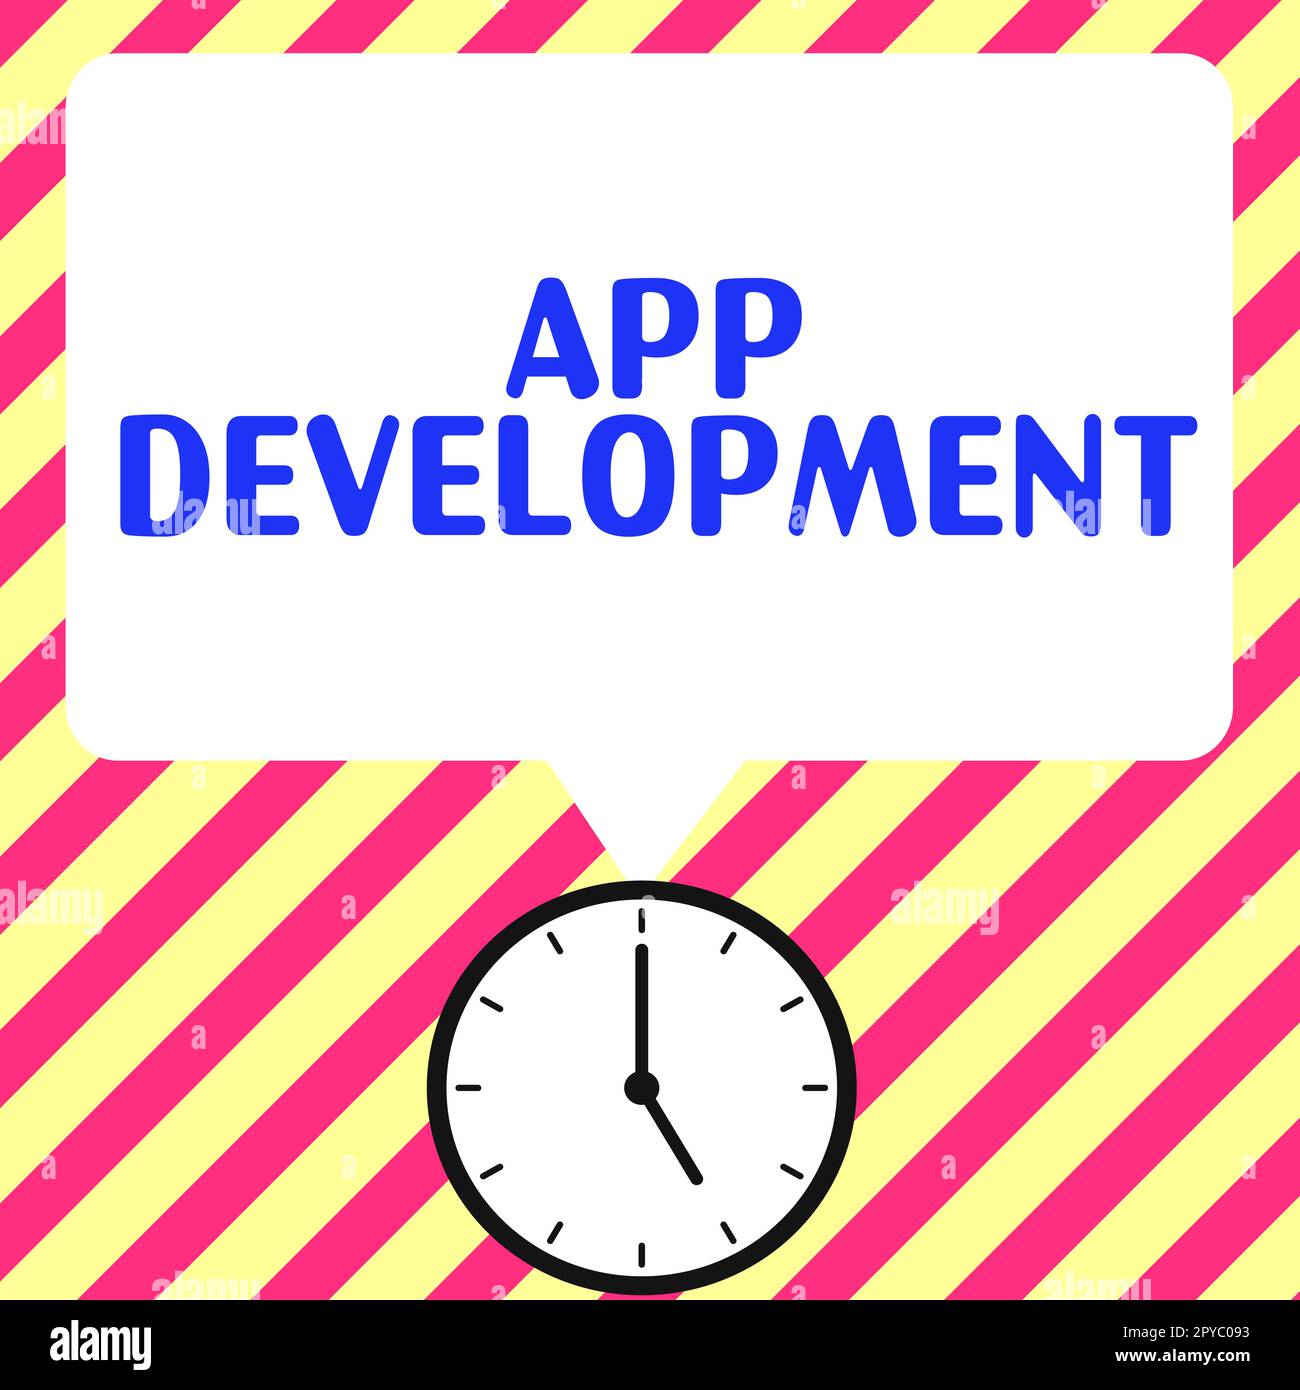 Text showing inspiration App Development. Word Written on Development services for awesome mobile and web experiences Stock Photo